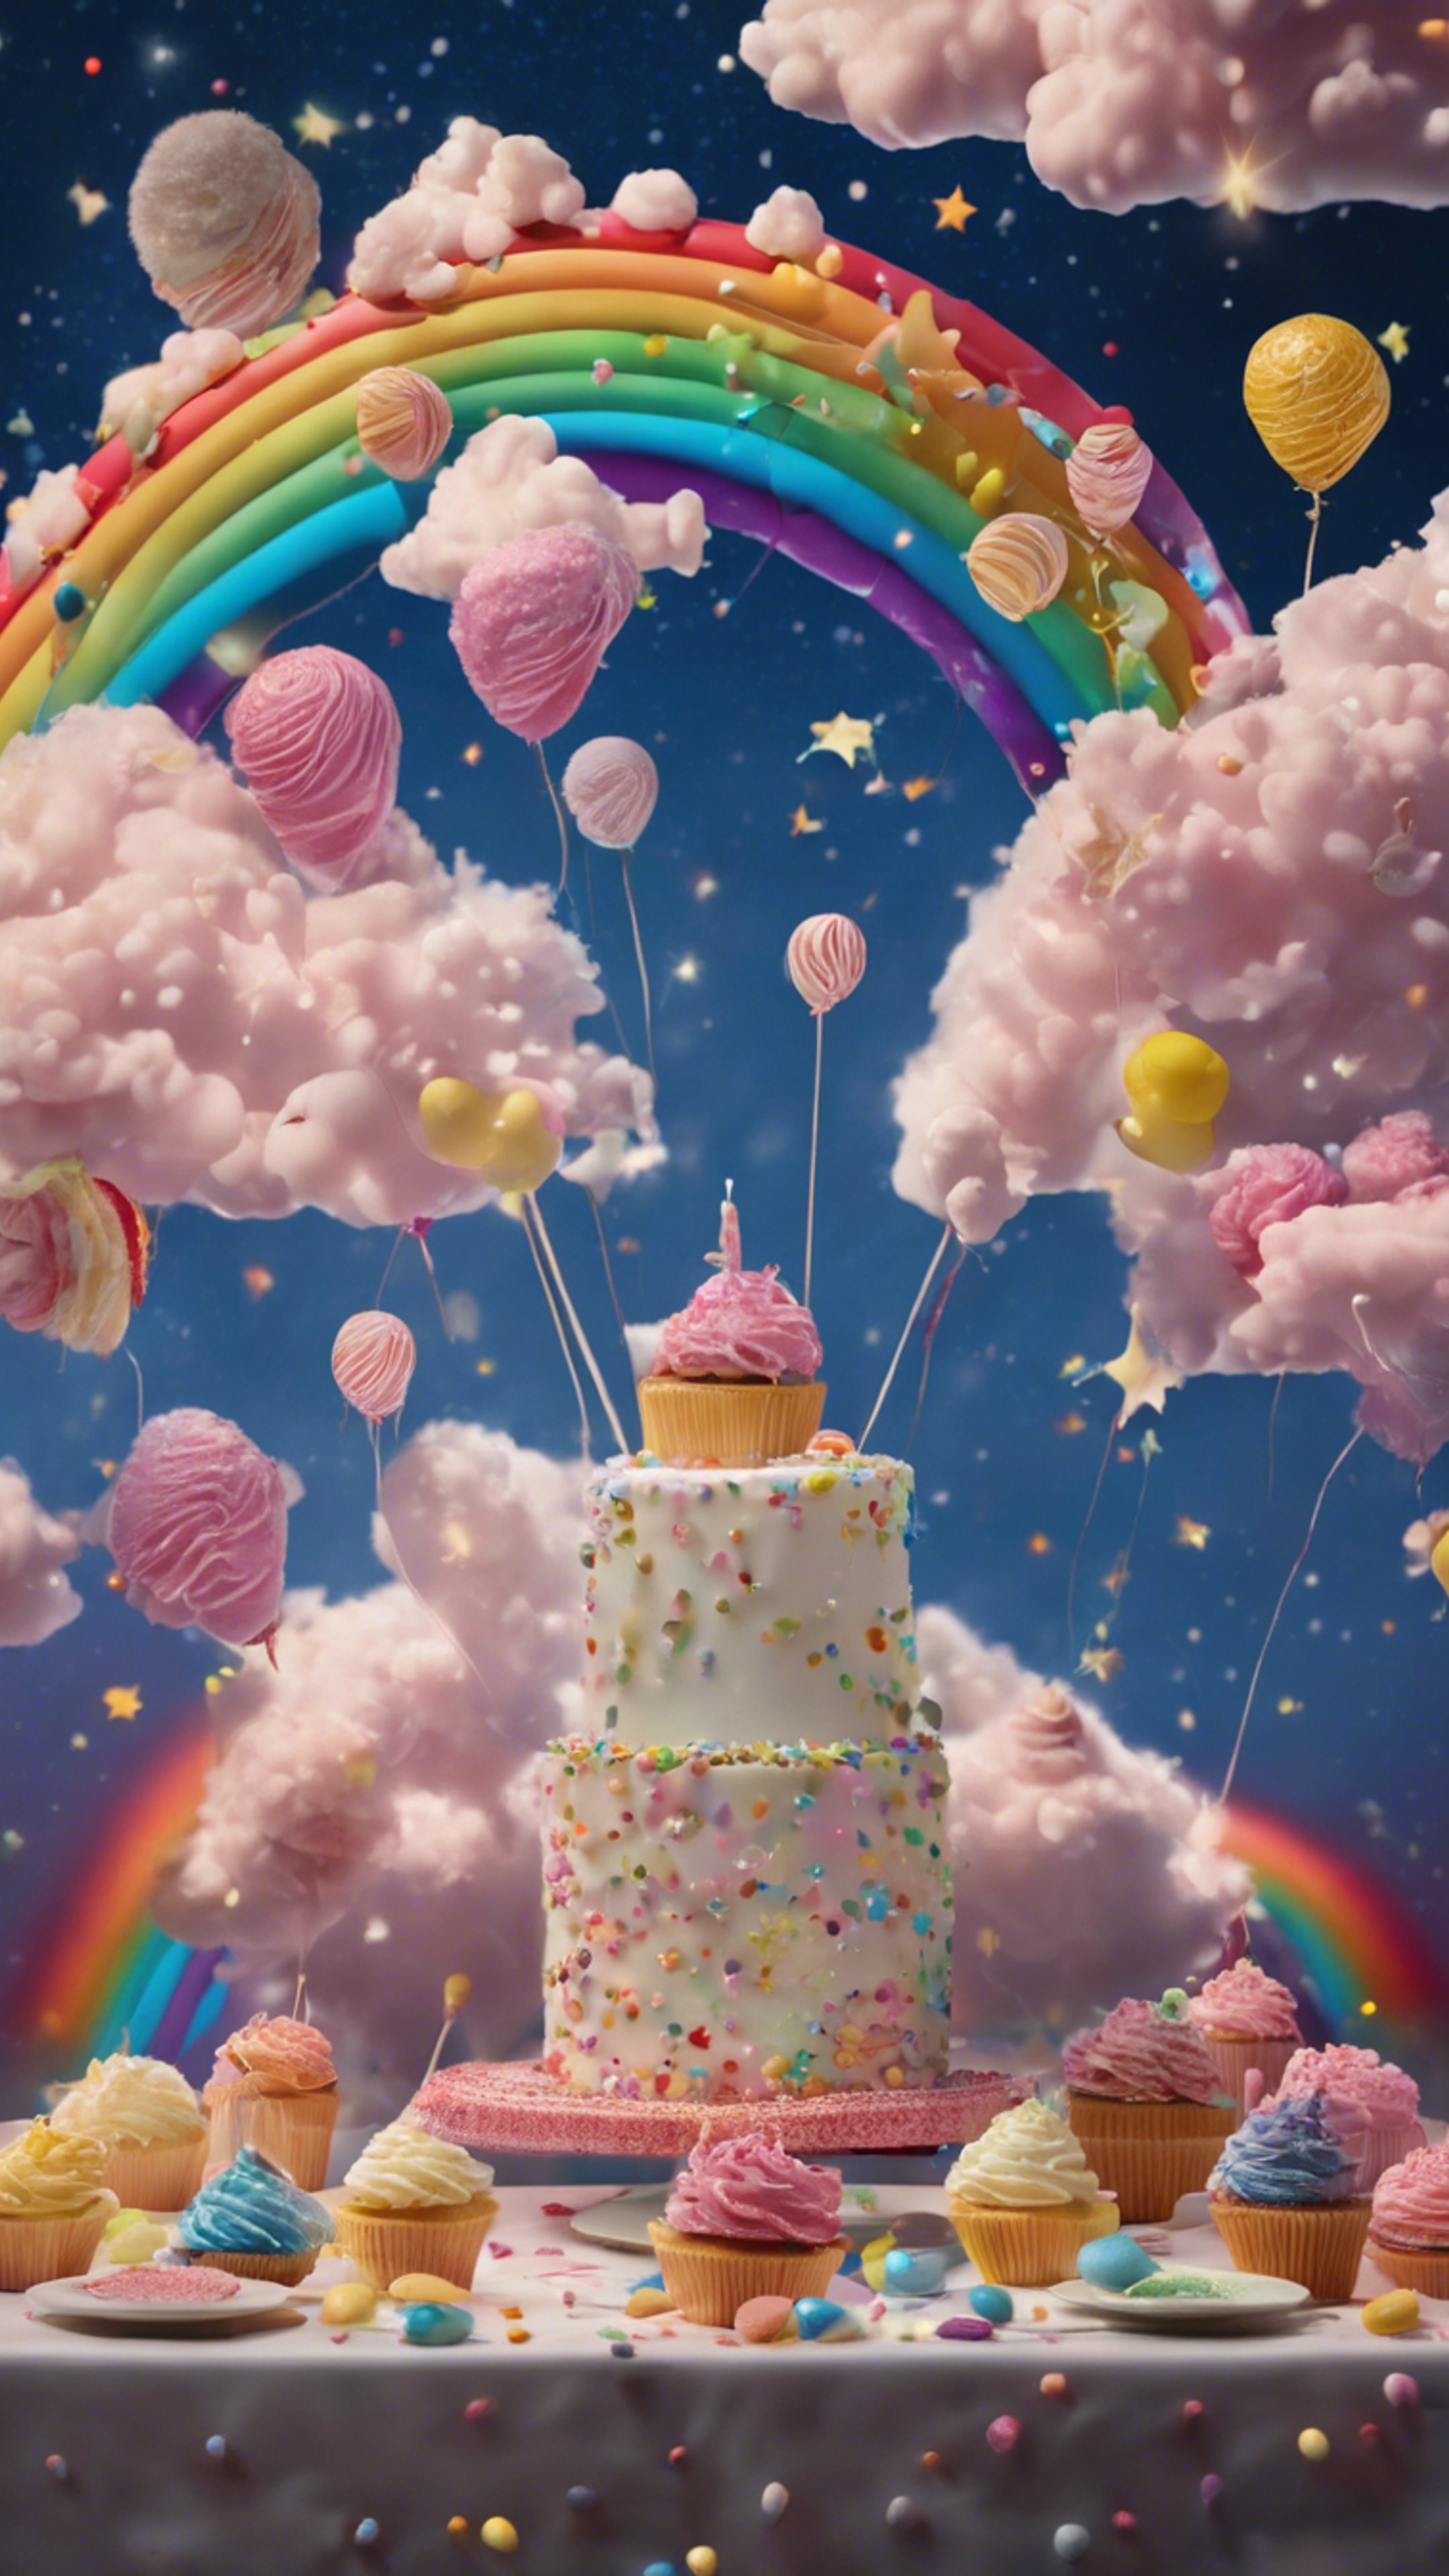 Surreal representation of a birthday party with floating cakes, candies amid fluffy clouds and rainbows discordantly juxtaposed against a starry night sky. Fond d'écran[7f18c2fd7760424e83fc]